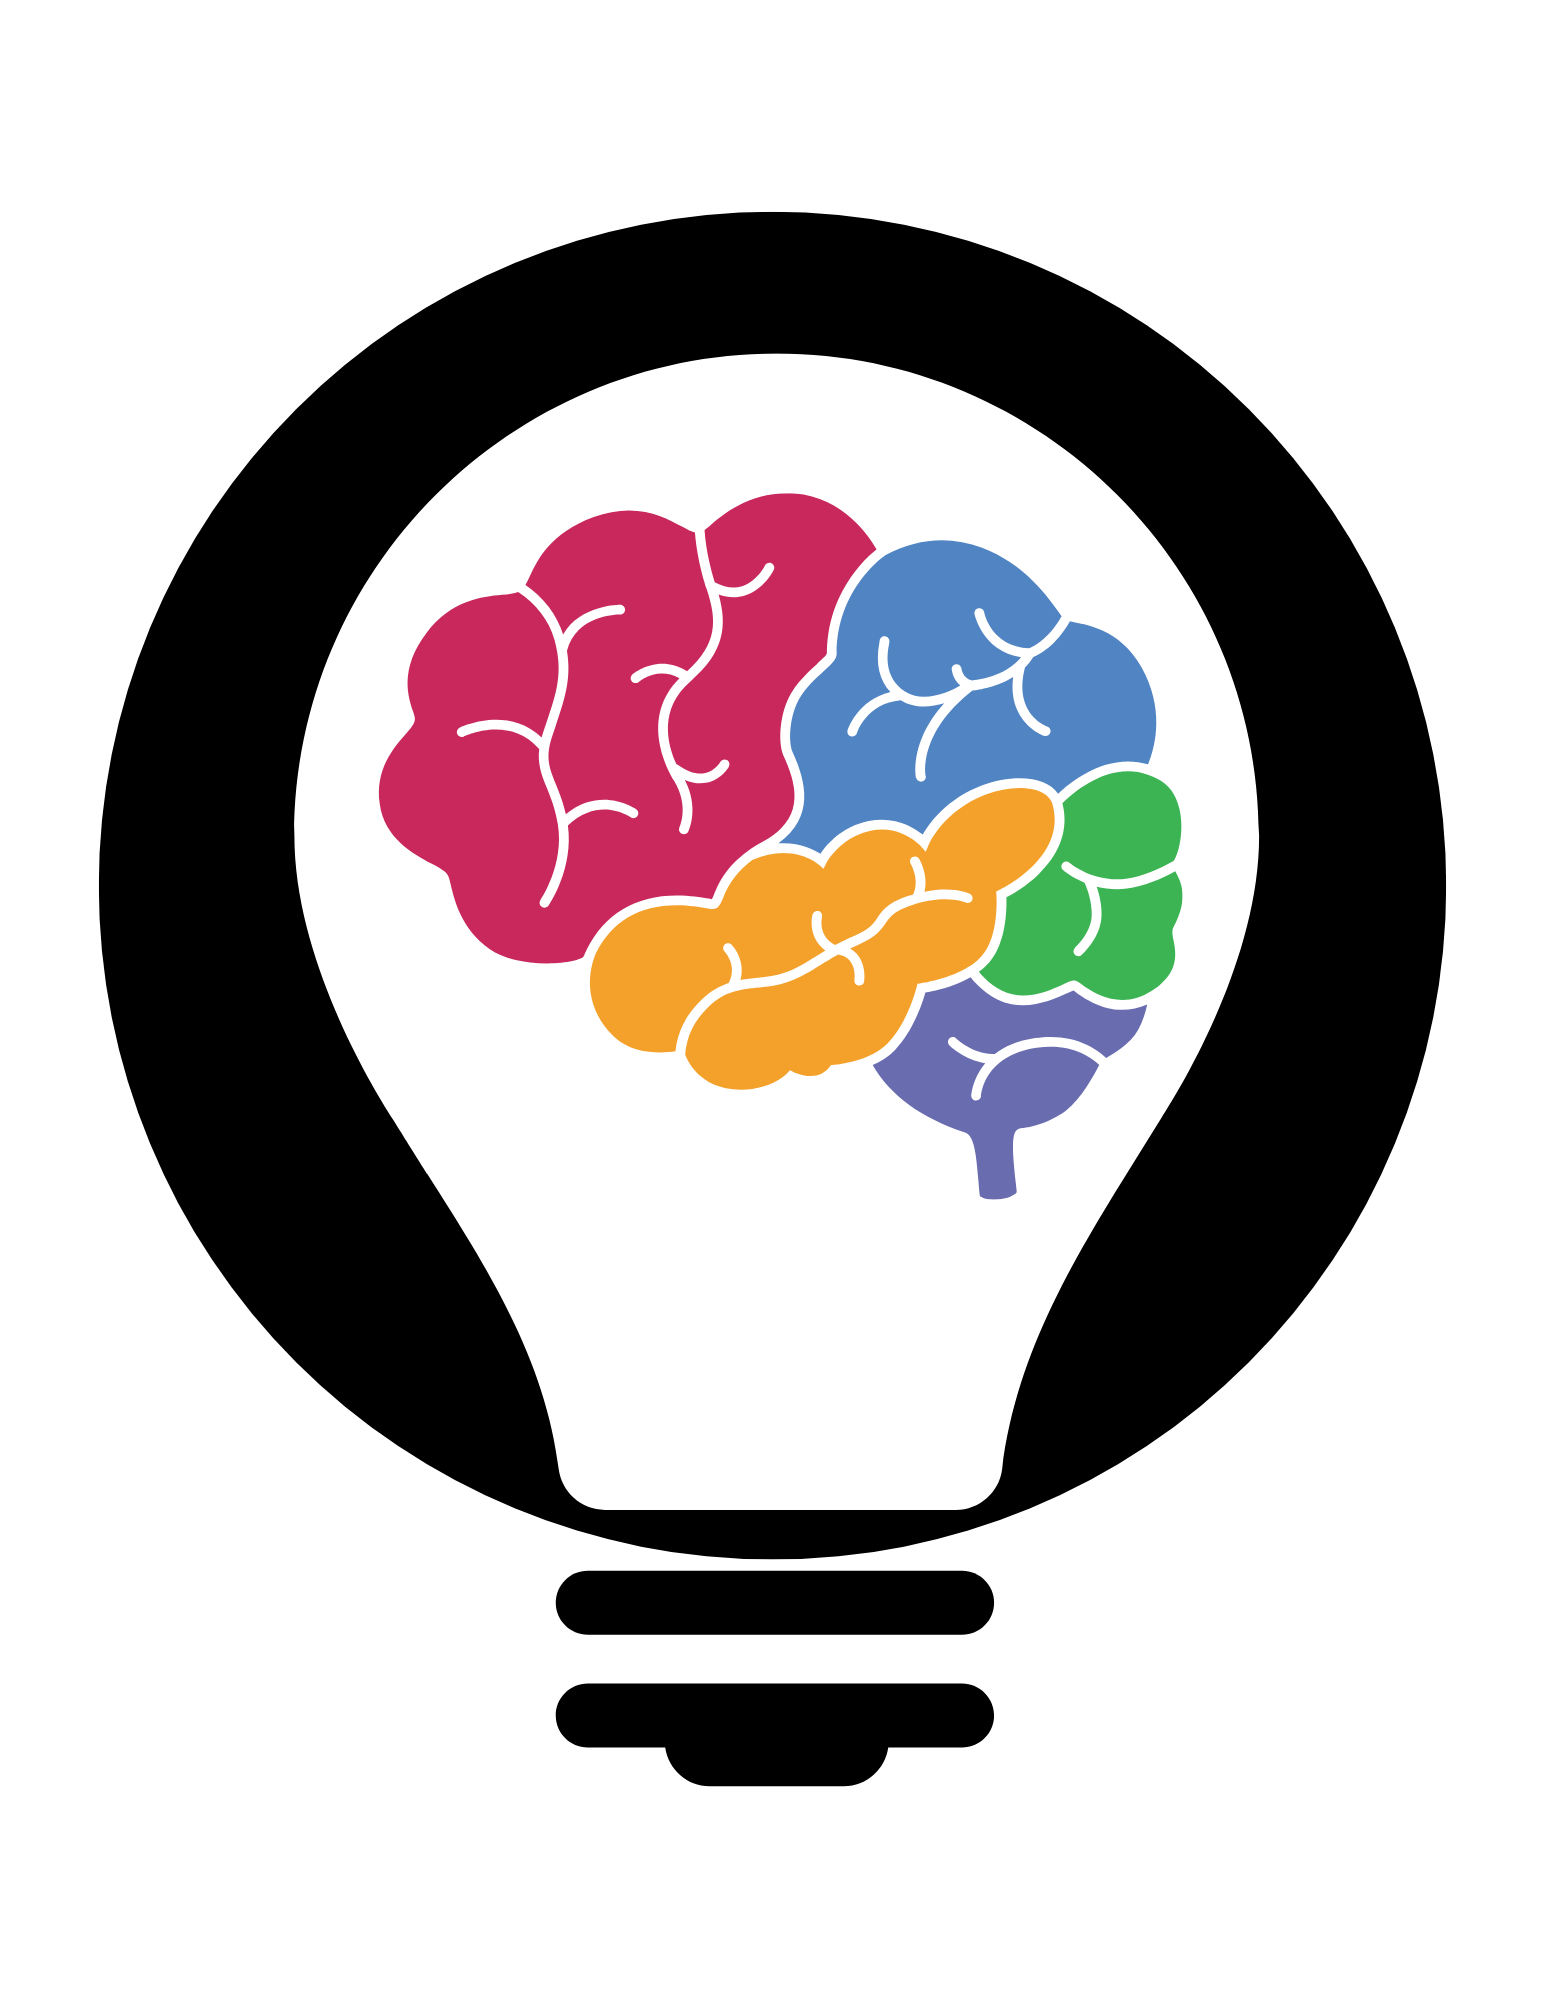 White lightbulb on a black circle with a multicolored brain in the center.